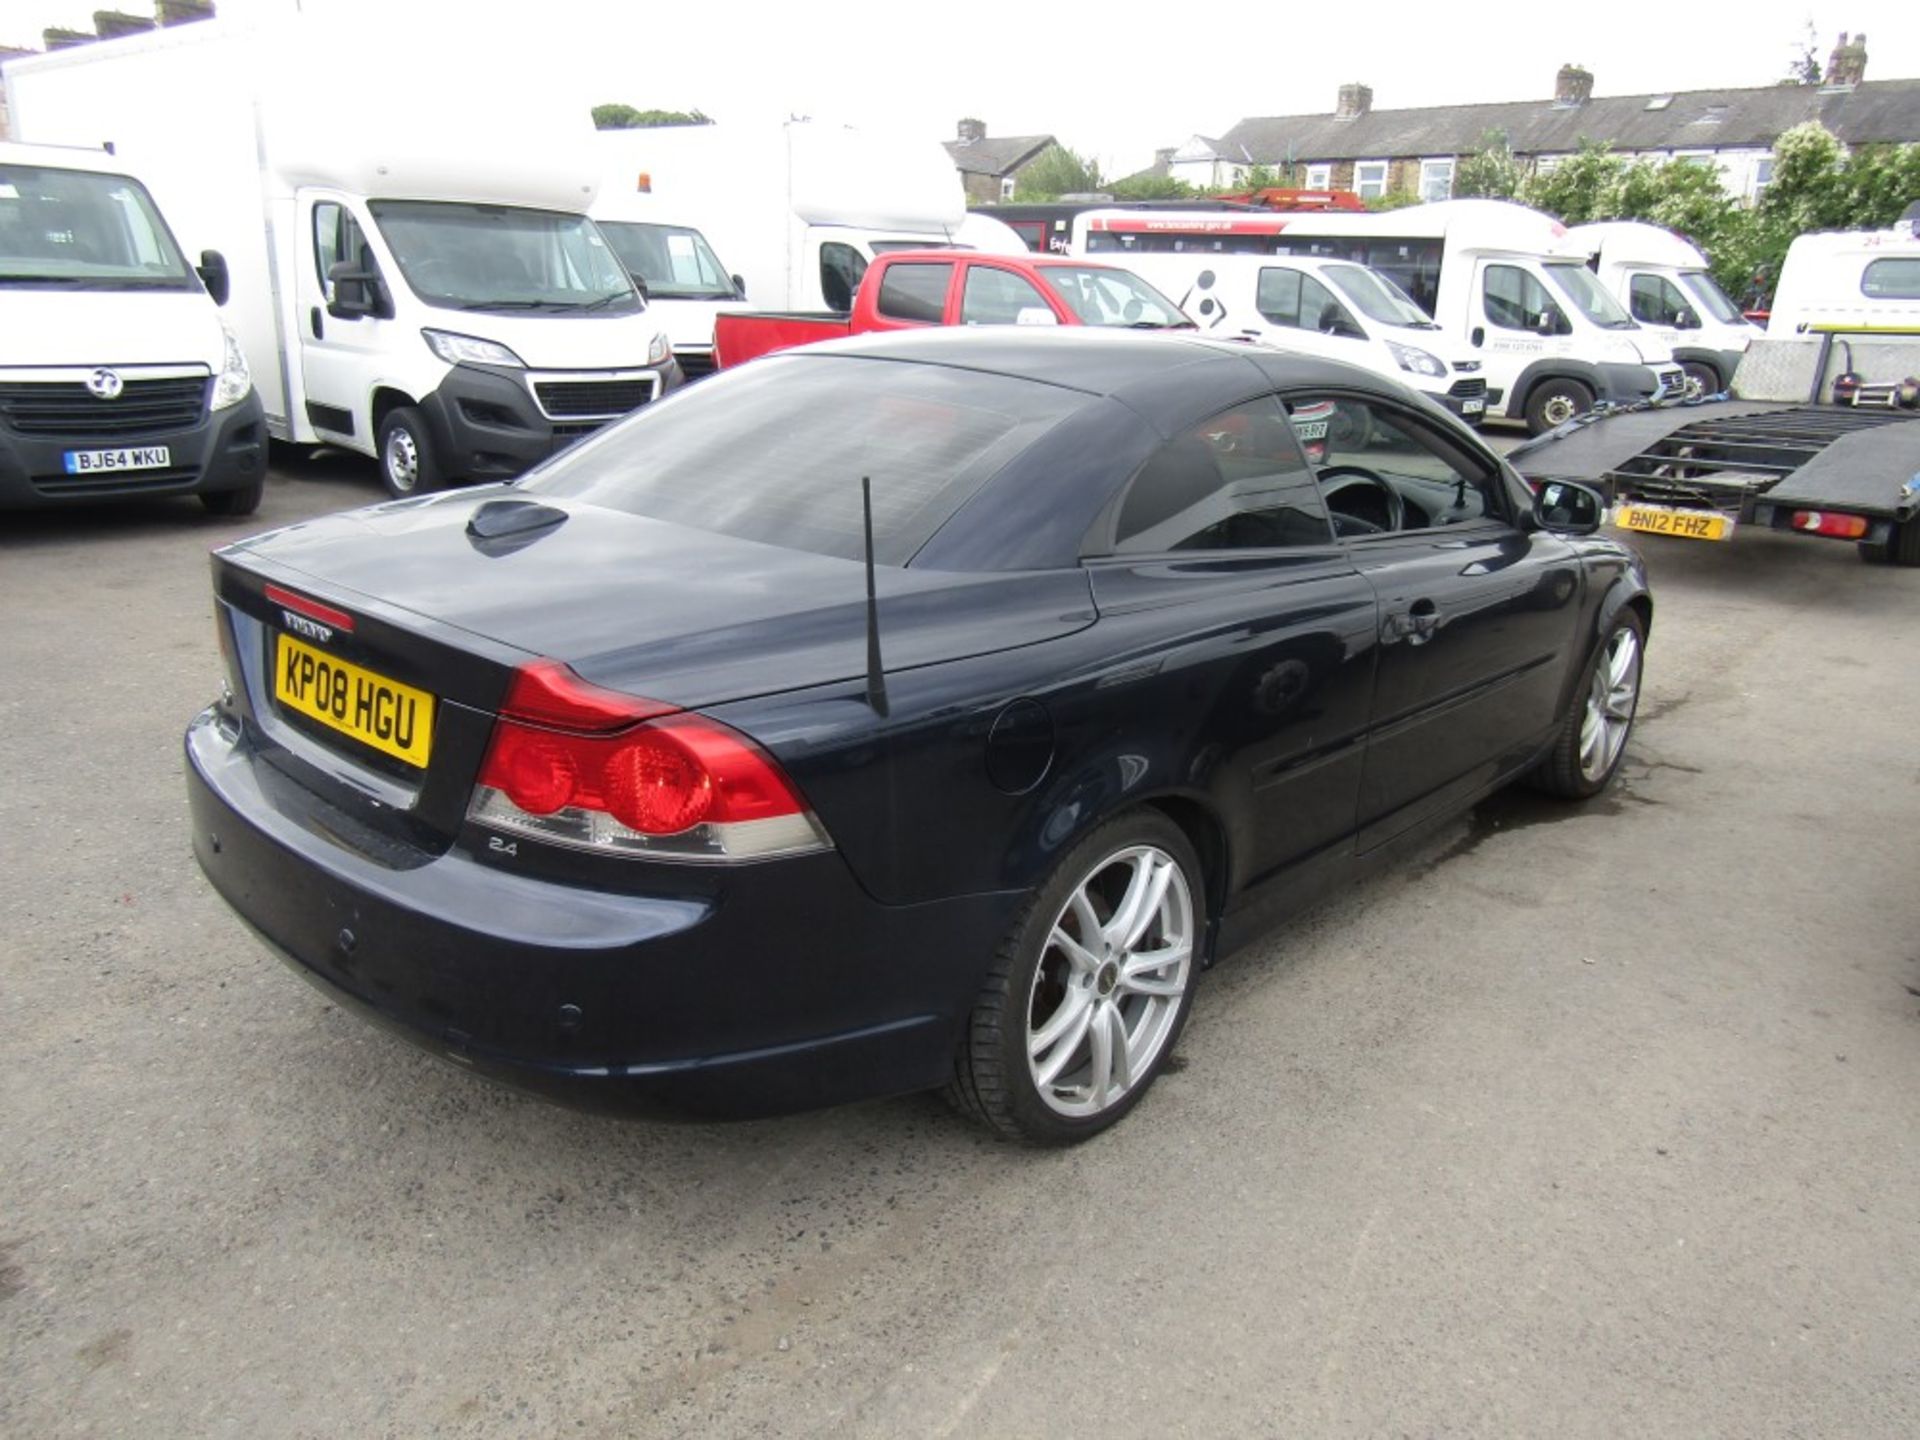 08 reg VOLVO C70 SE LUX AUTO CONVERTIBLE, 1ST REG 04/08, TEST 05/23, 175809M, V5 HERE, 6 FORMER - Image 4 of 6